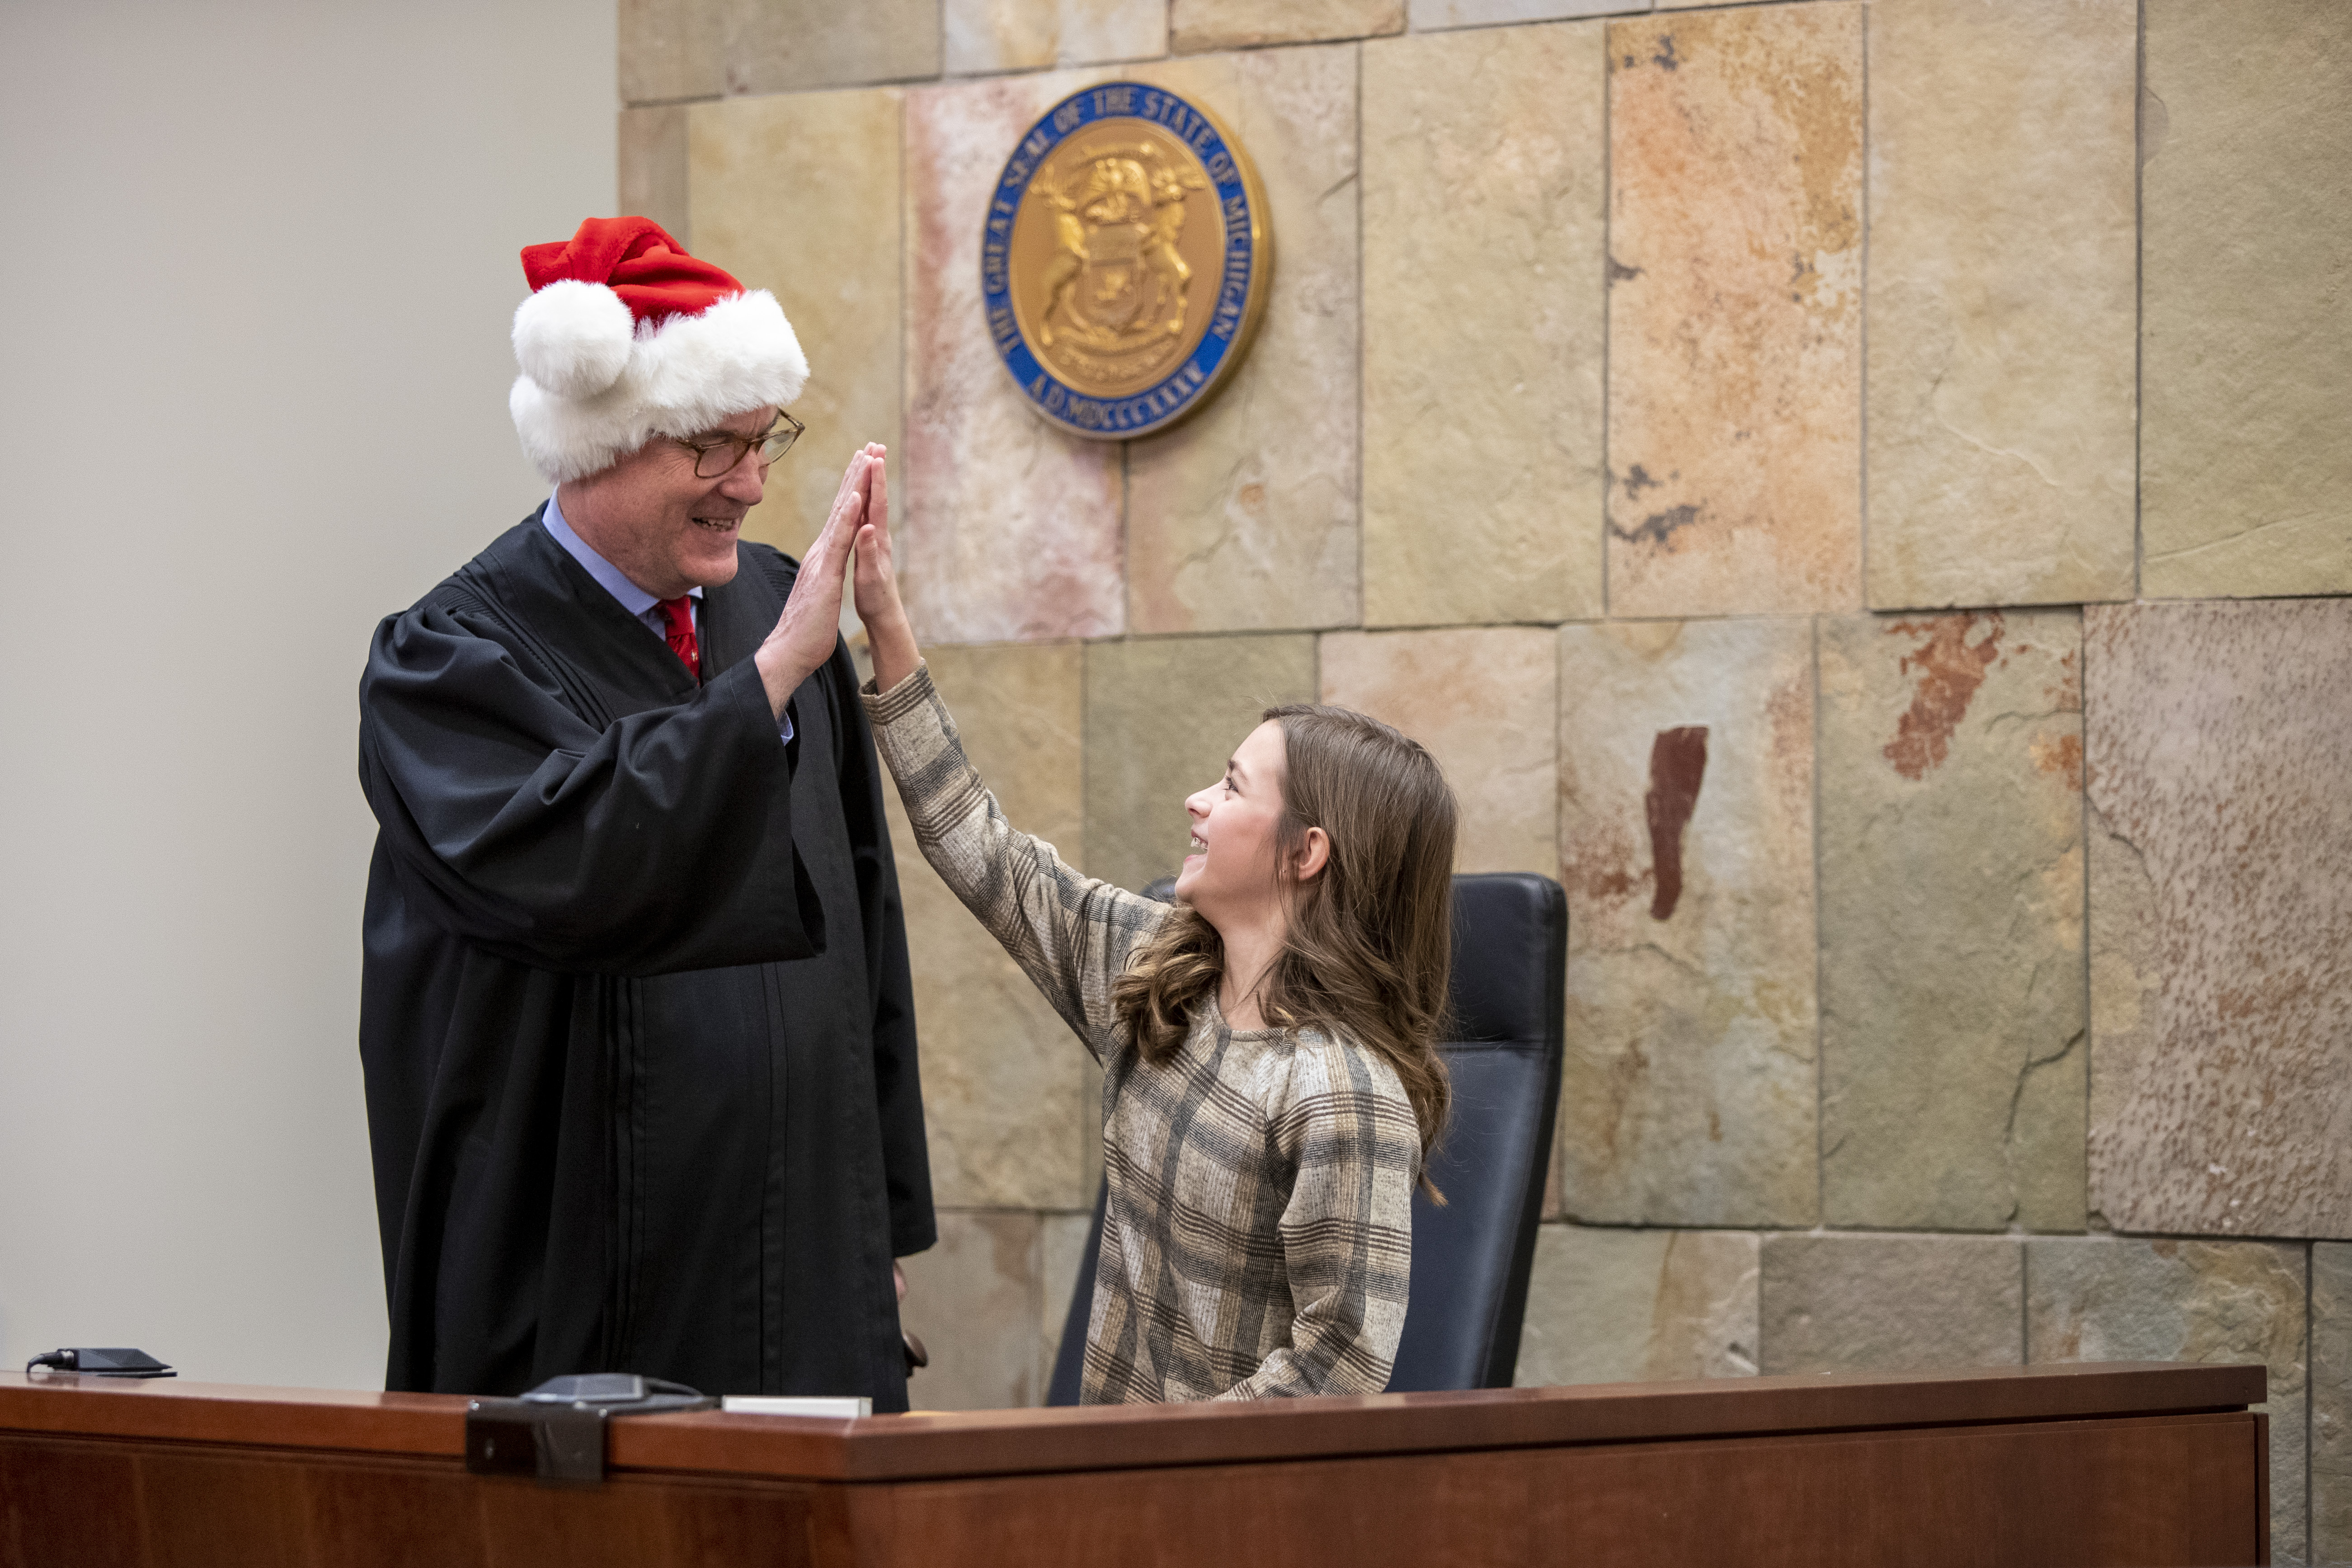 Judge T.J. Ackert gives a high five to Corryn Myers, 10, after letting her use his gavel during Adoption Day at the Kent County Courthouse in Grand Rapids on Thursday, Dec. 8, 2022. Corryn’s parents, Tammy and Jordan Myers, are the biological parents of 1-year-old twins Eames and Ellison. Lauren Vermilye, a surrogate, gave birth to the twins after Tammy went through breast cancer treatment and has no claim to the babies. The Myers family was able to adopt the twins after convincing the court system to grant them custody. (Cory Morse | MLive.com)